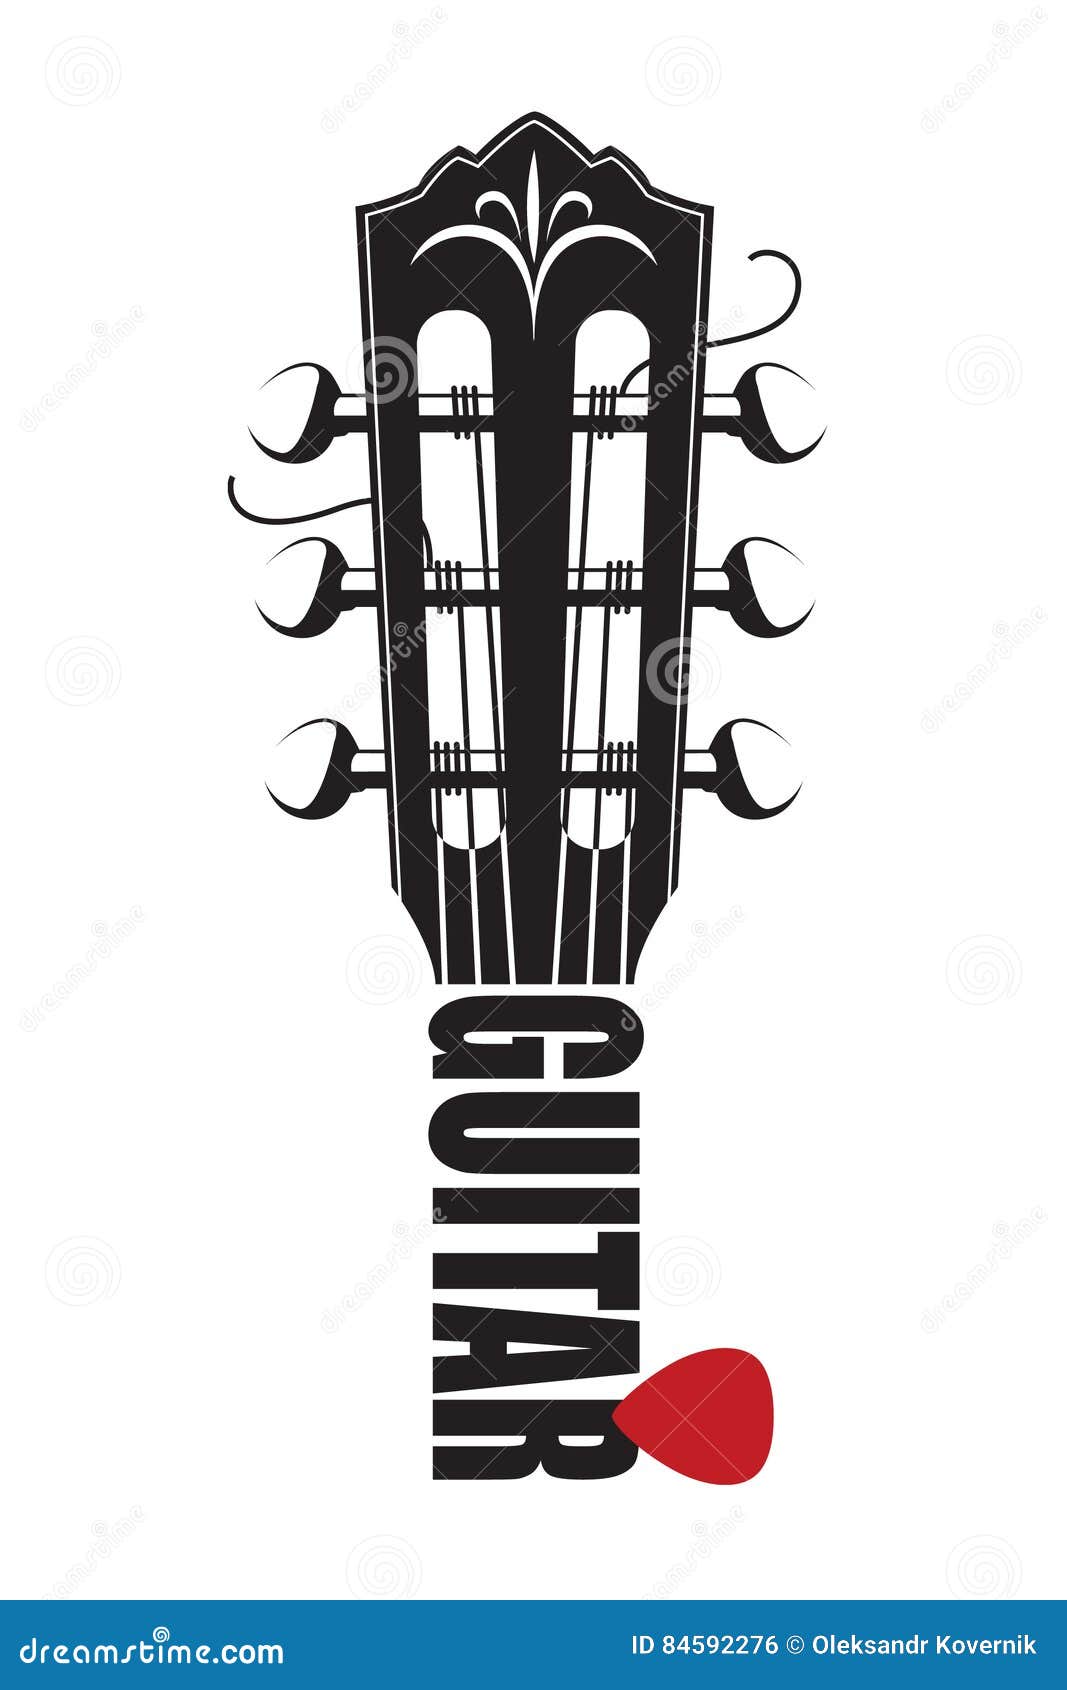 icon with guitar neck and pick